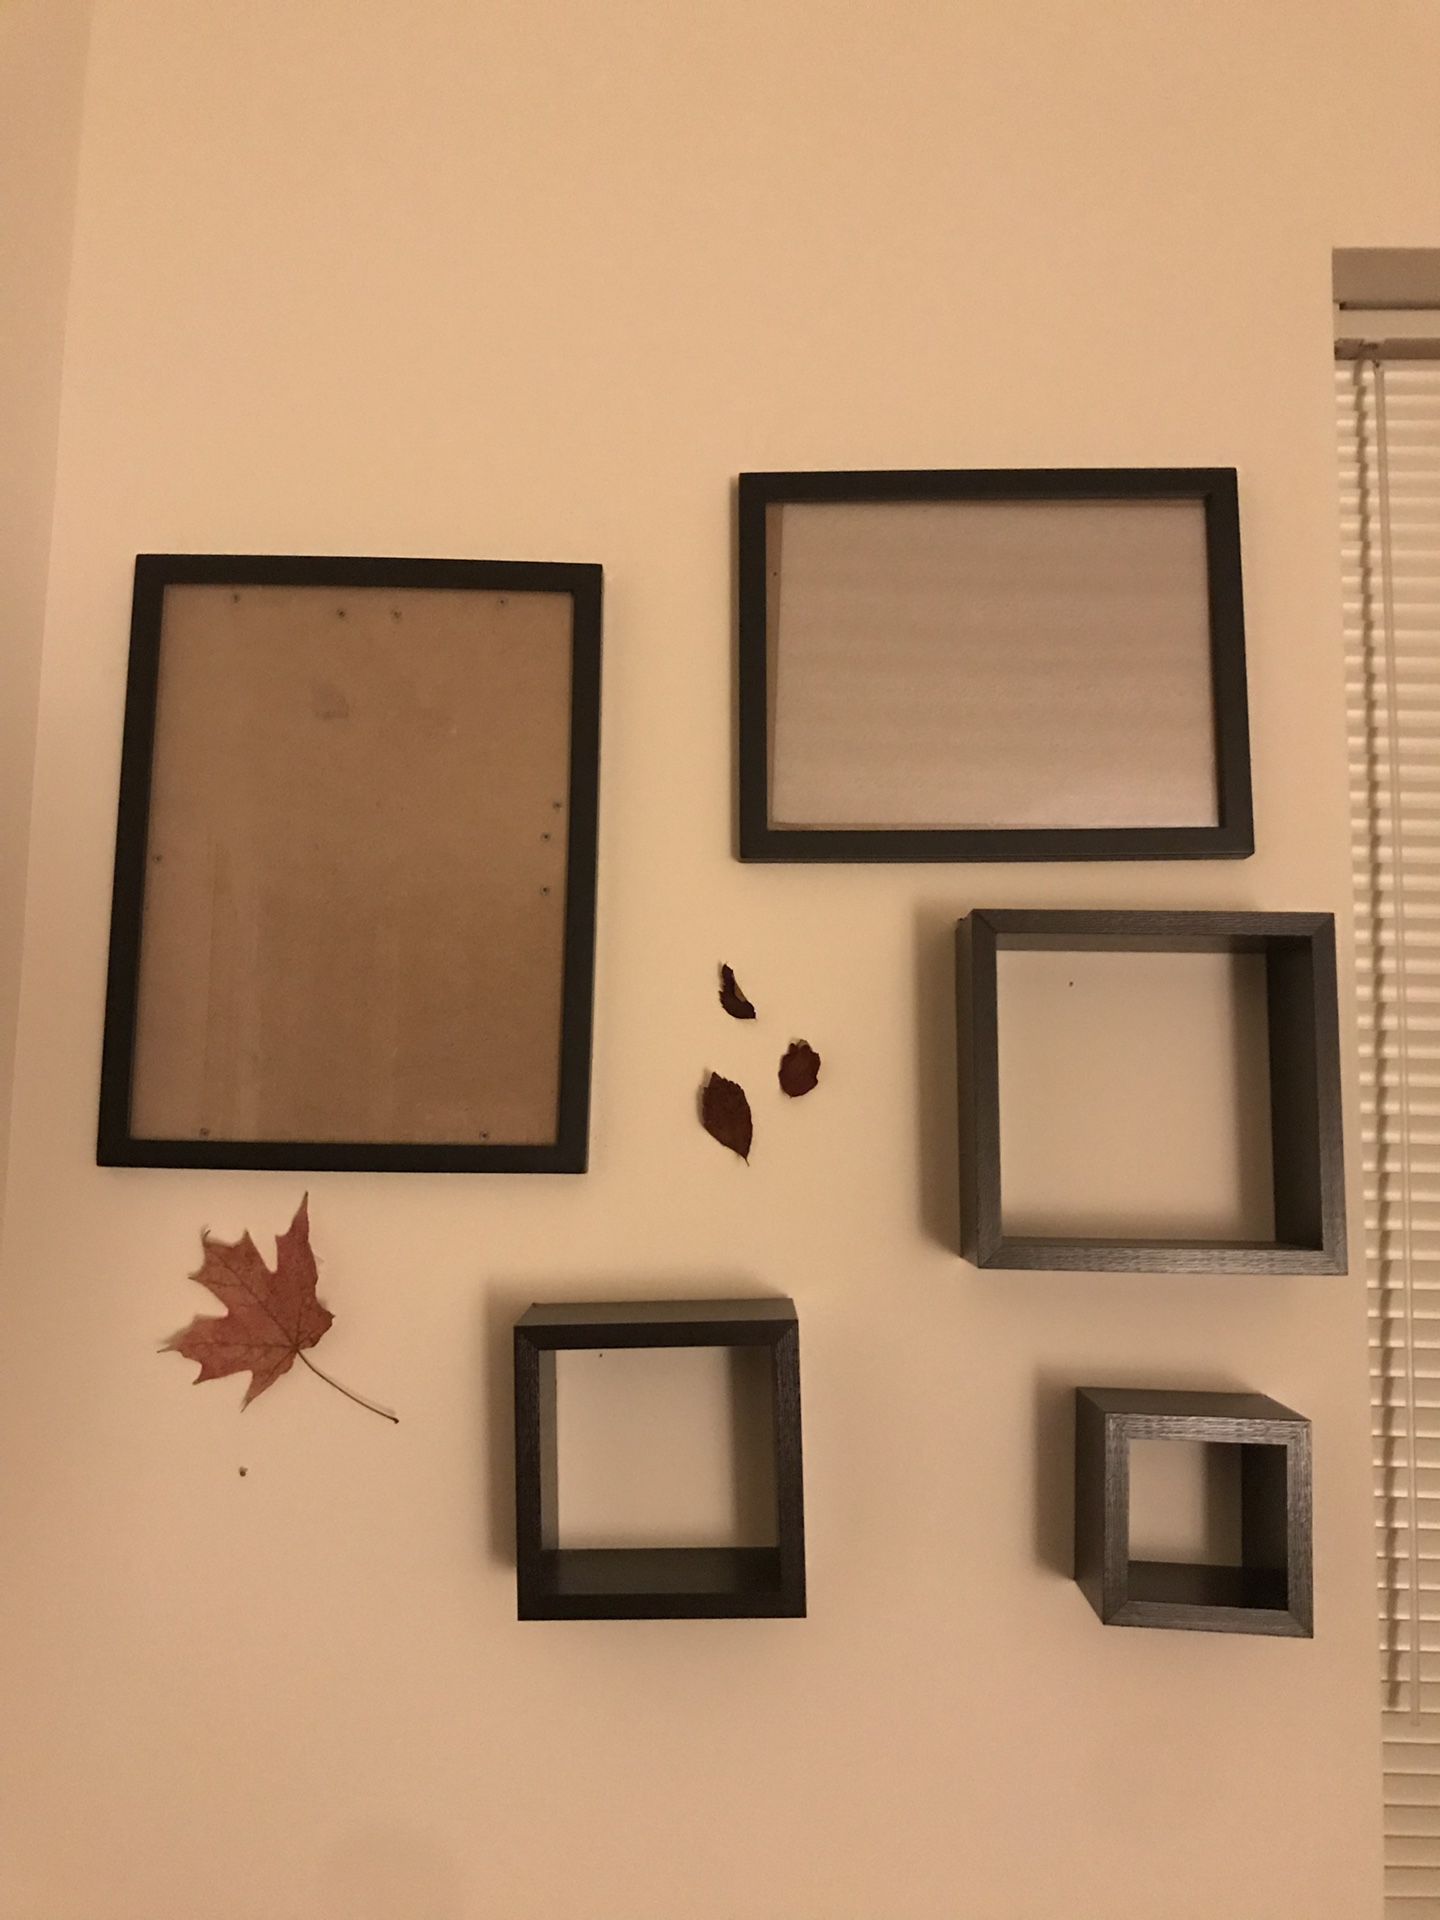 2 picture frames + 3 wall shelves